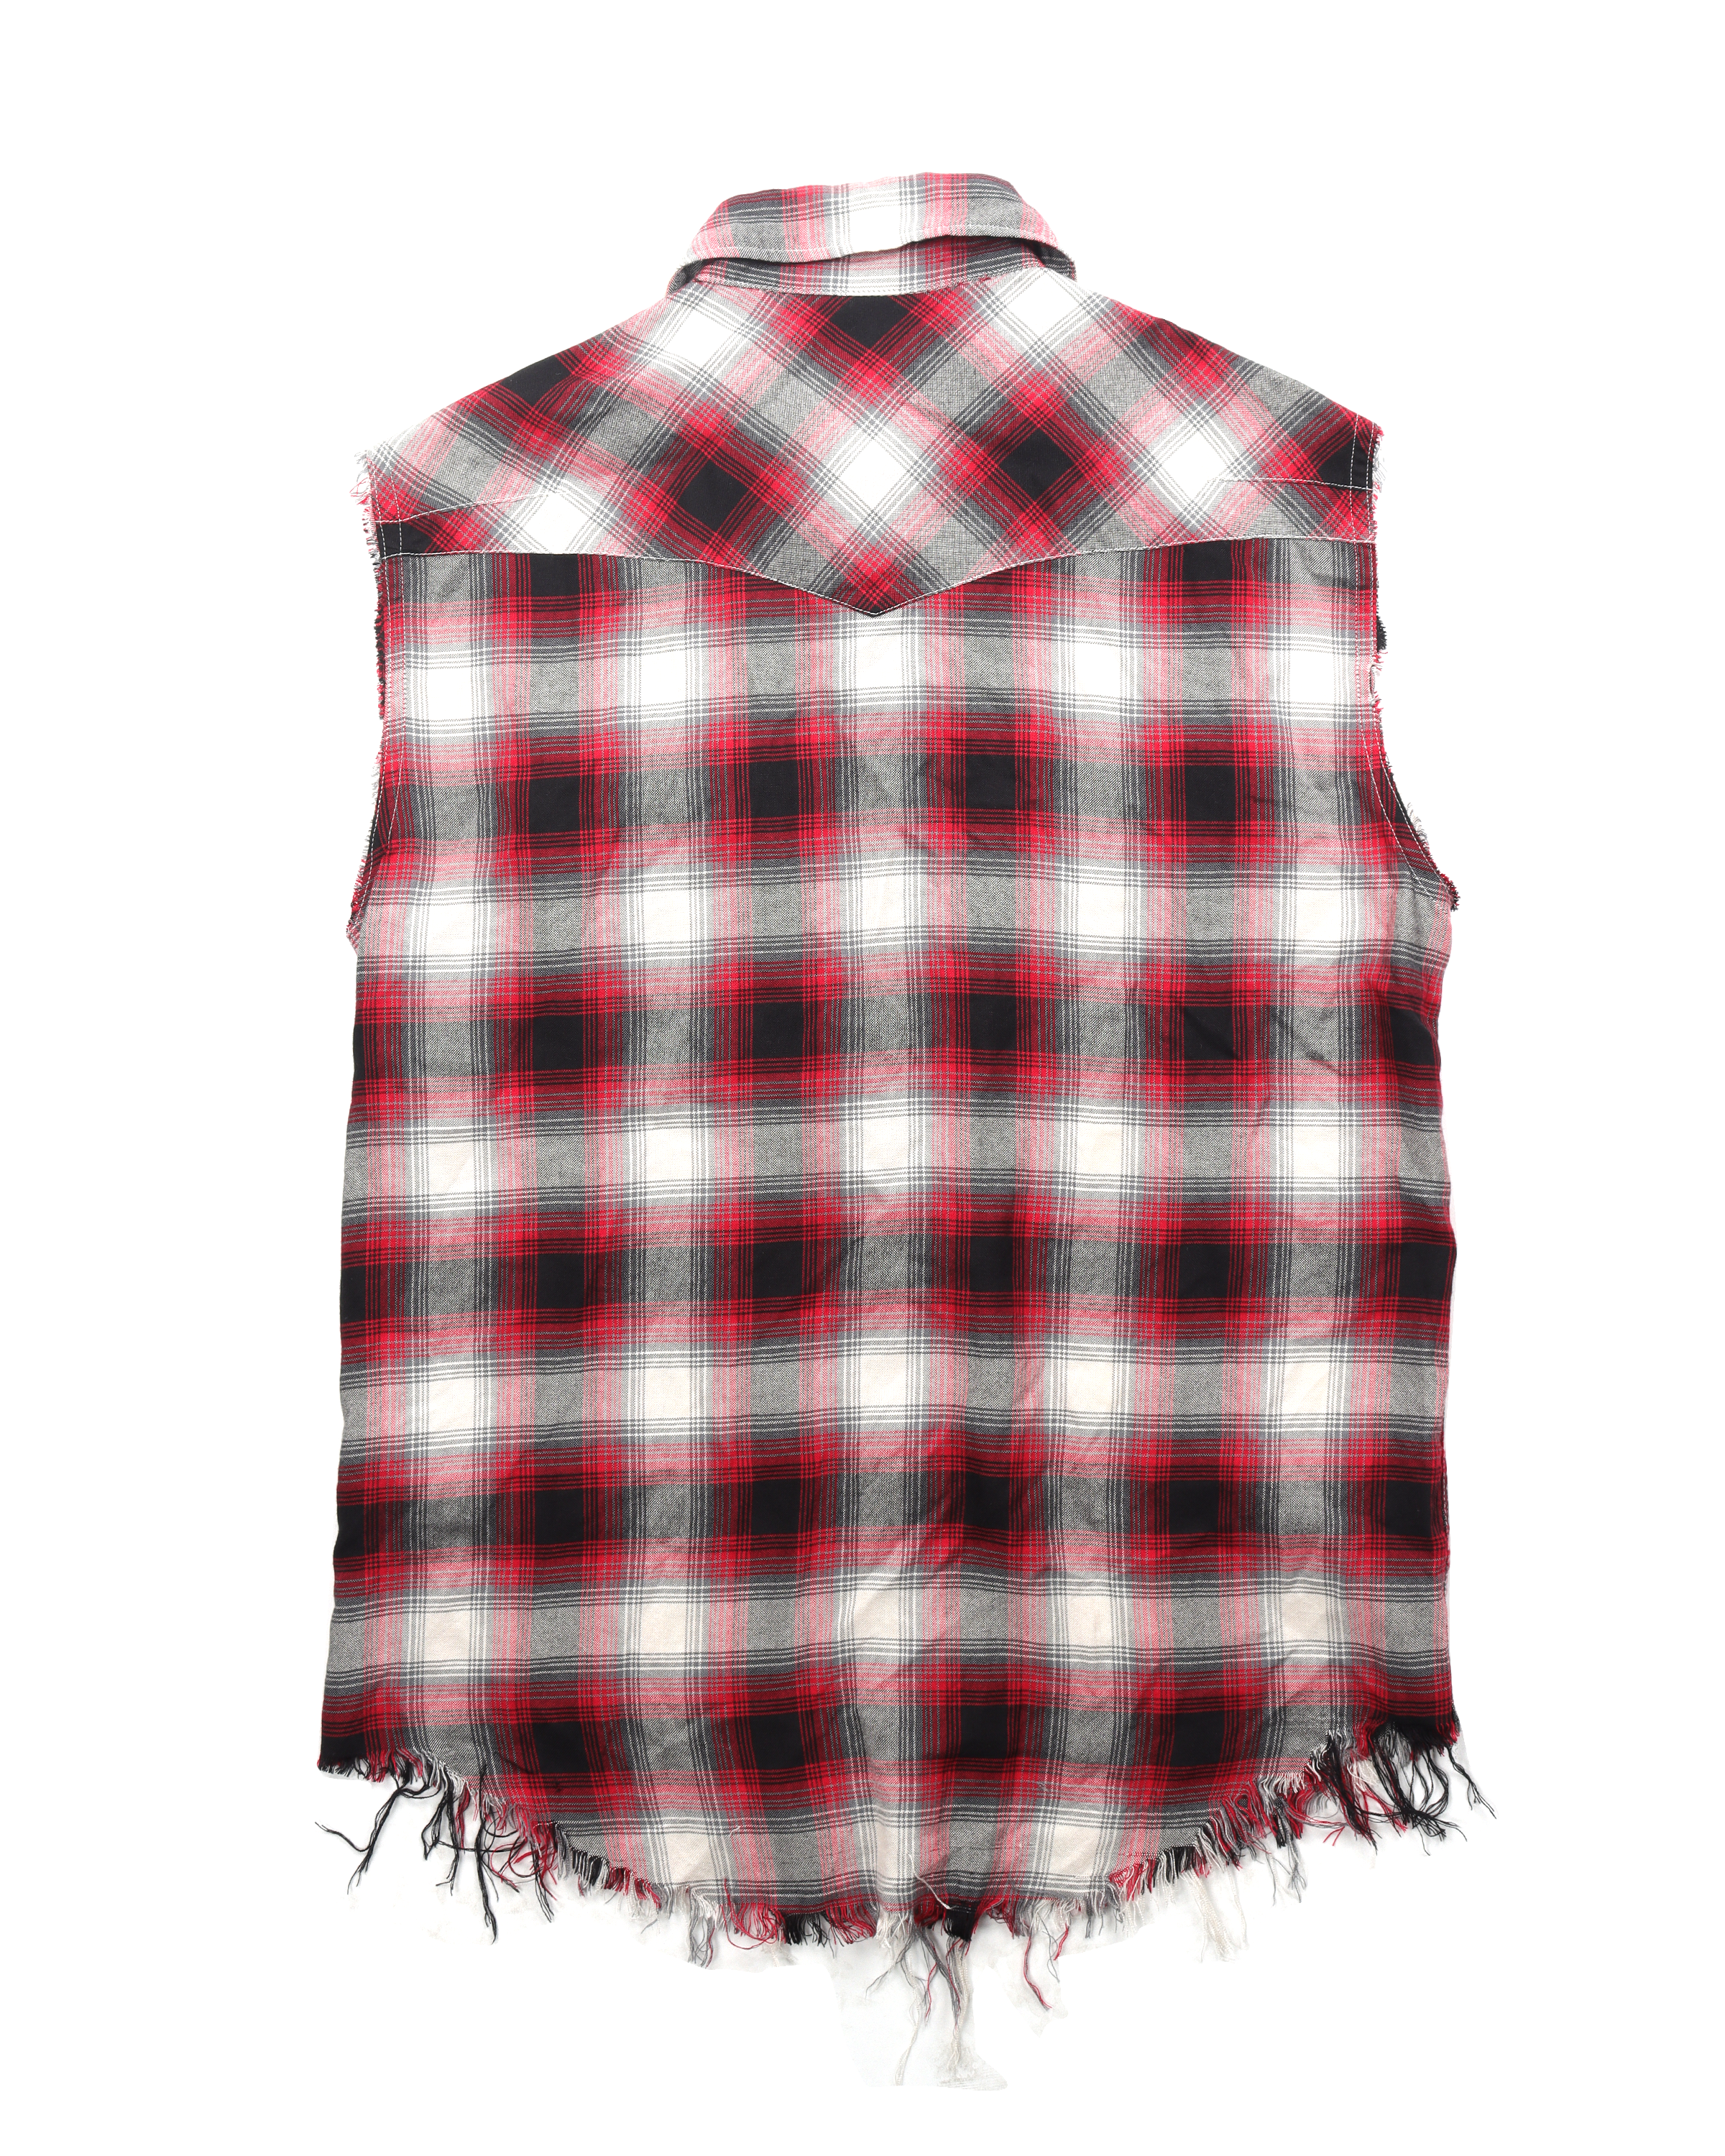 Sleeveless Flannel Shirt (2005) "The High Streets"